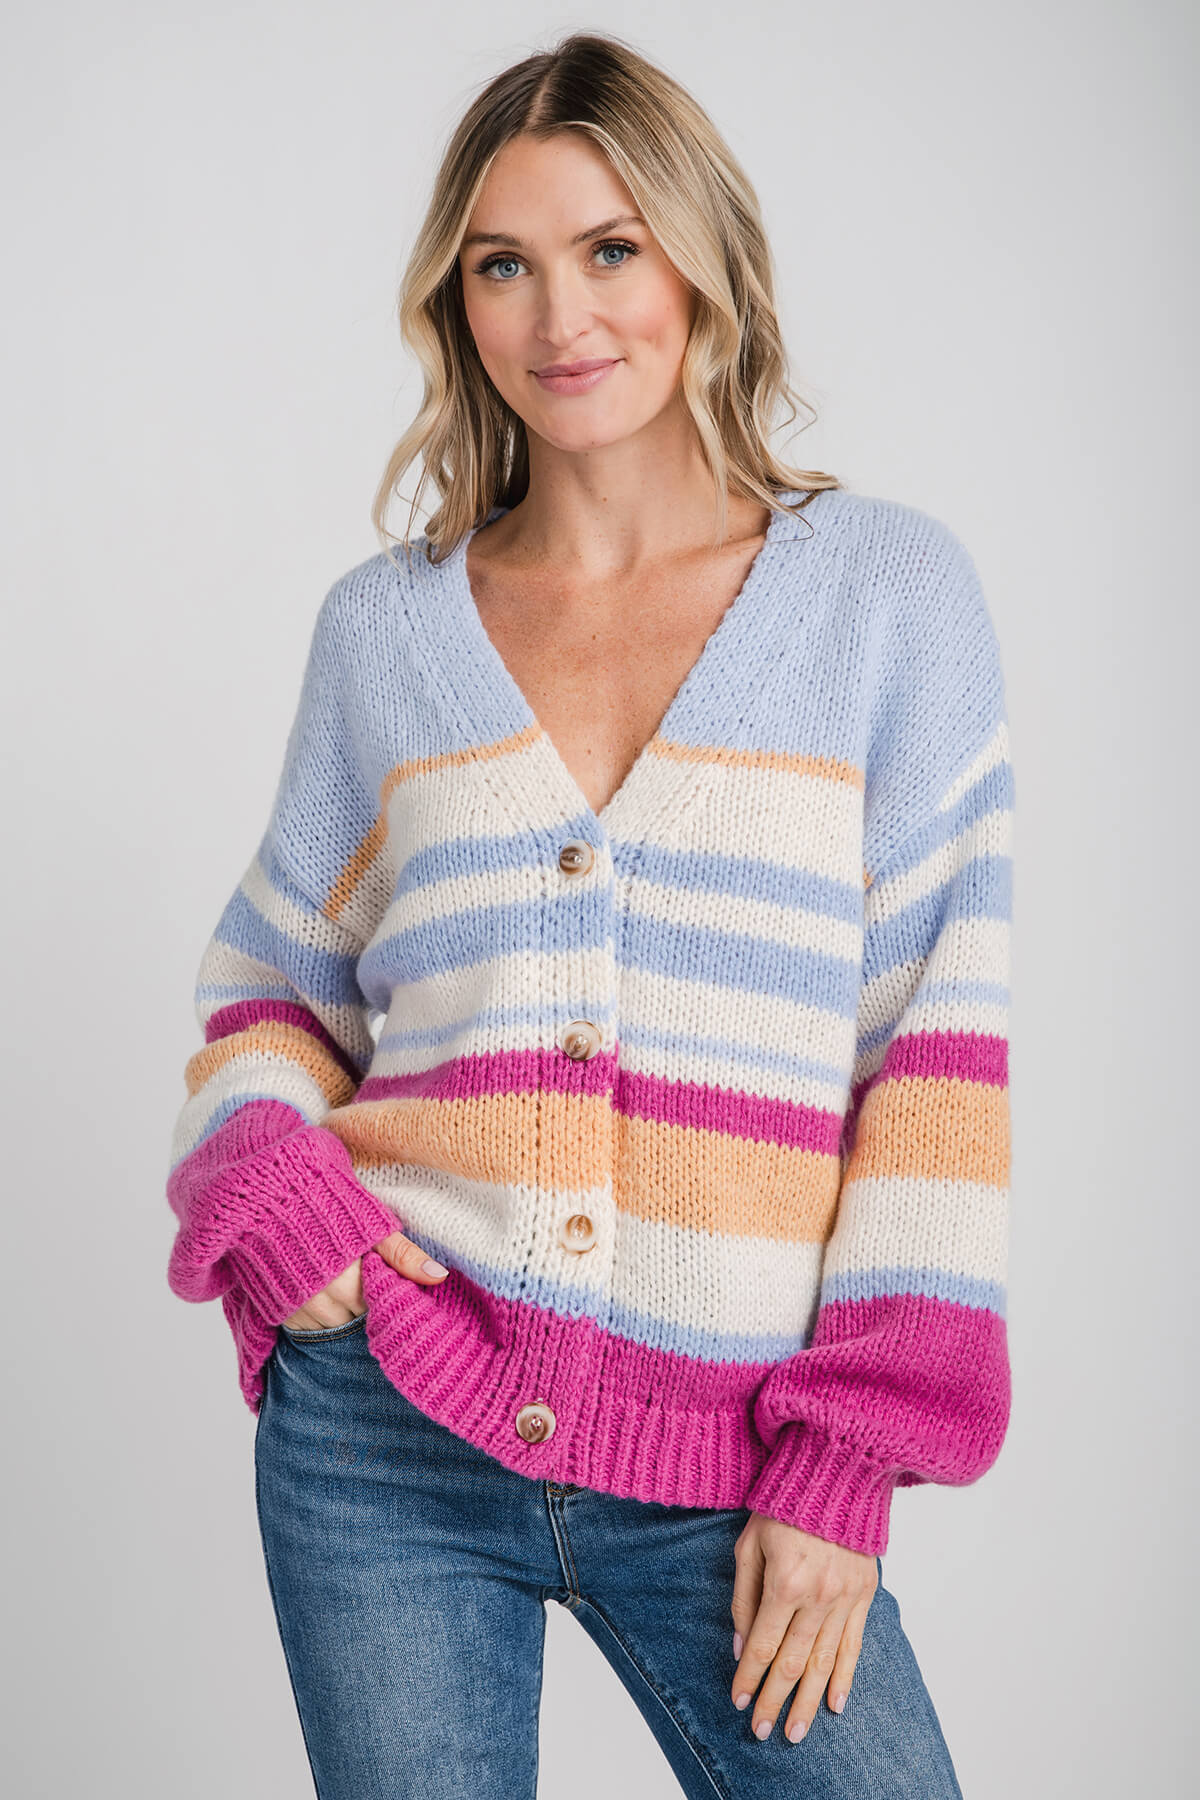 Z Supply Chasing Sunsets Cardigan